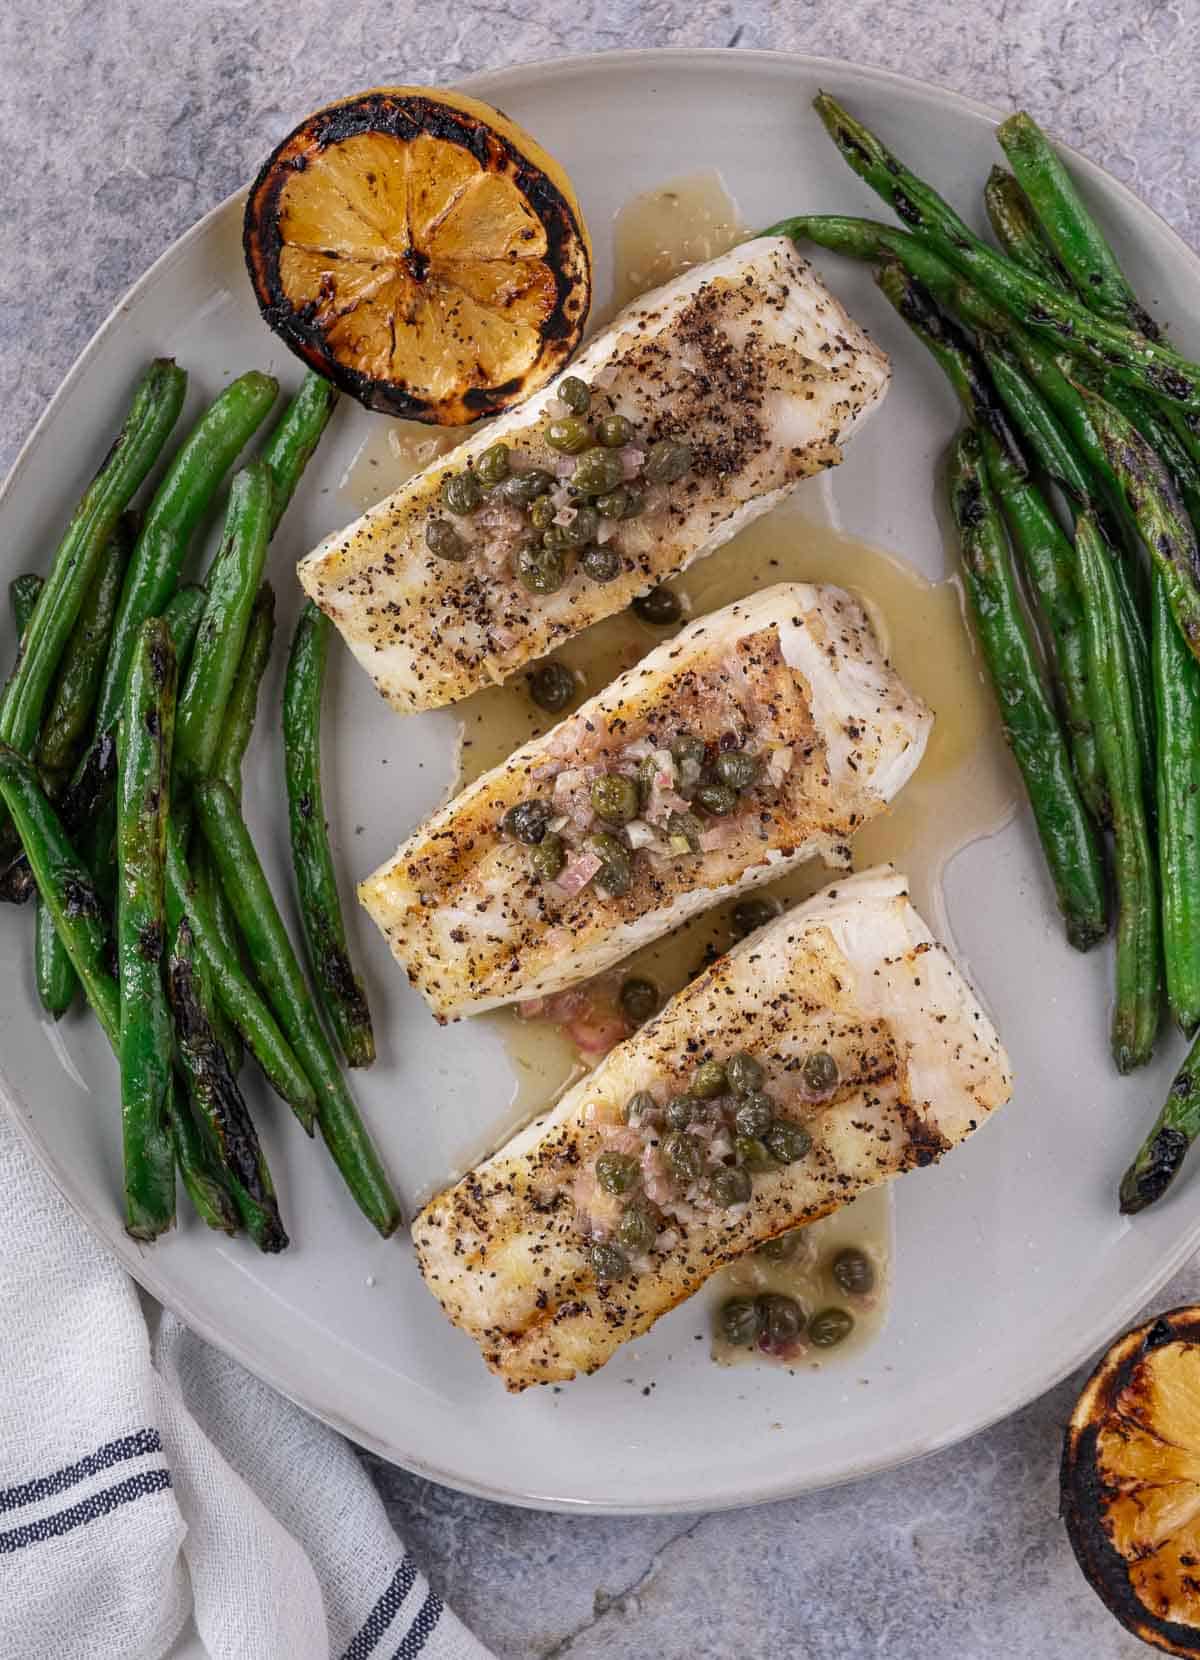 3 Slices of grilled halibut on a platter with sides of grilled green beans.